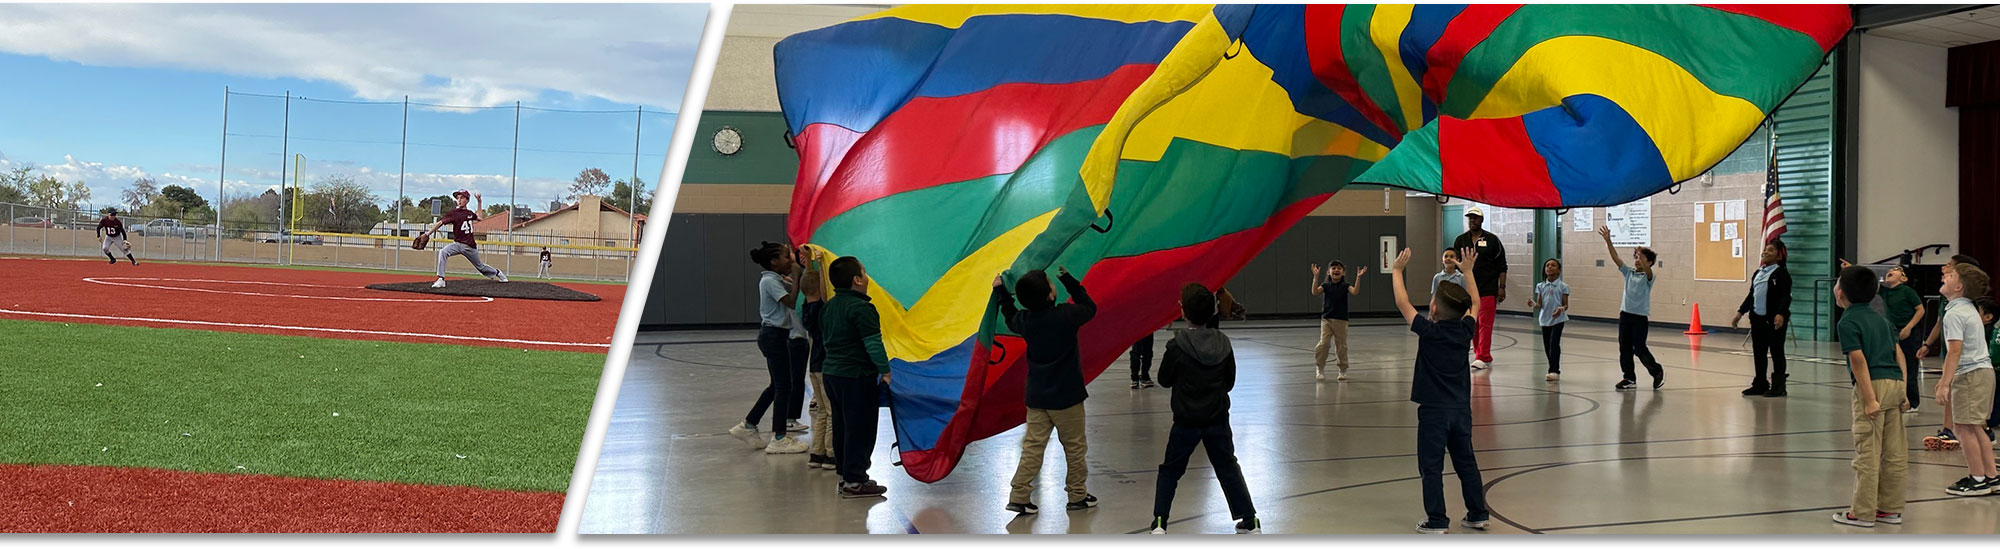 Students playing baseball, and students playing with a parachute in gym class